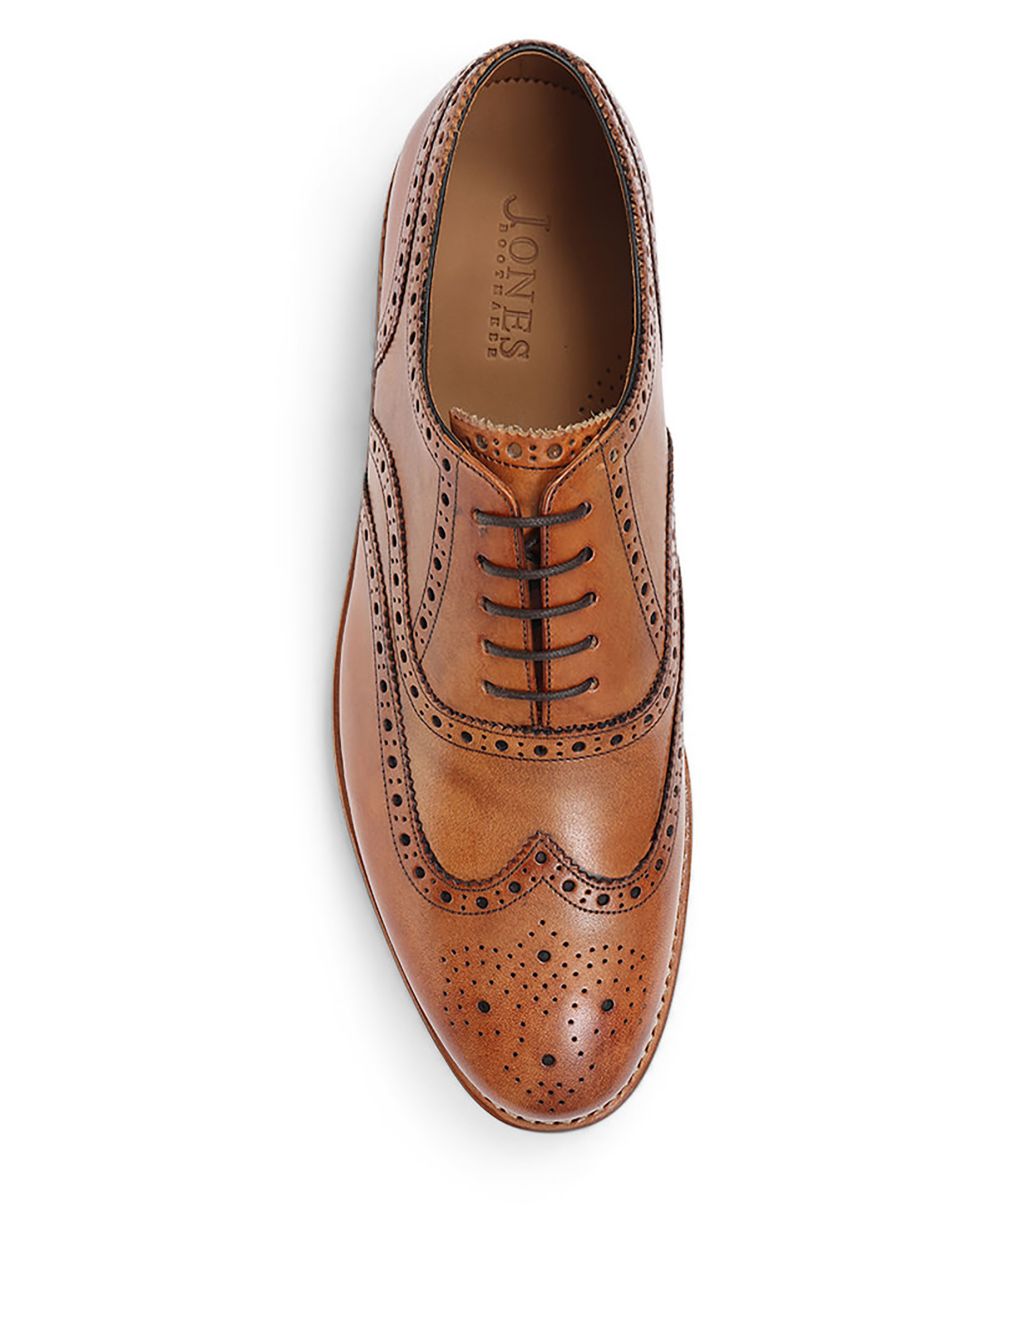 Leather Brogues image 4